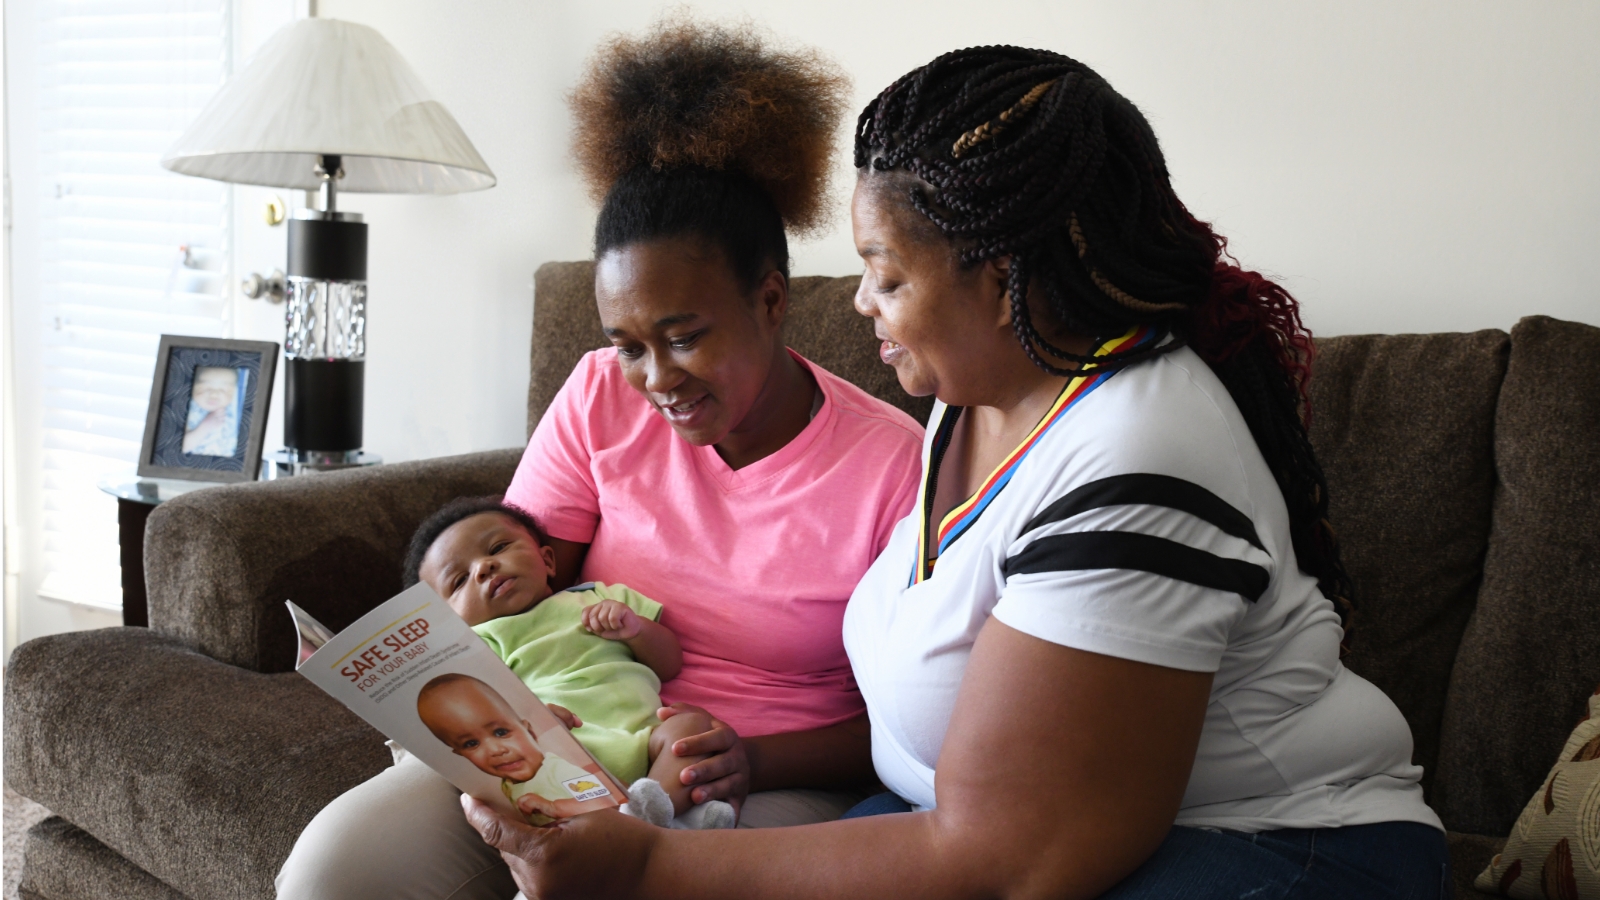 A mother (left) is holding a baby in her lap as another woman (right) goes over materials